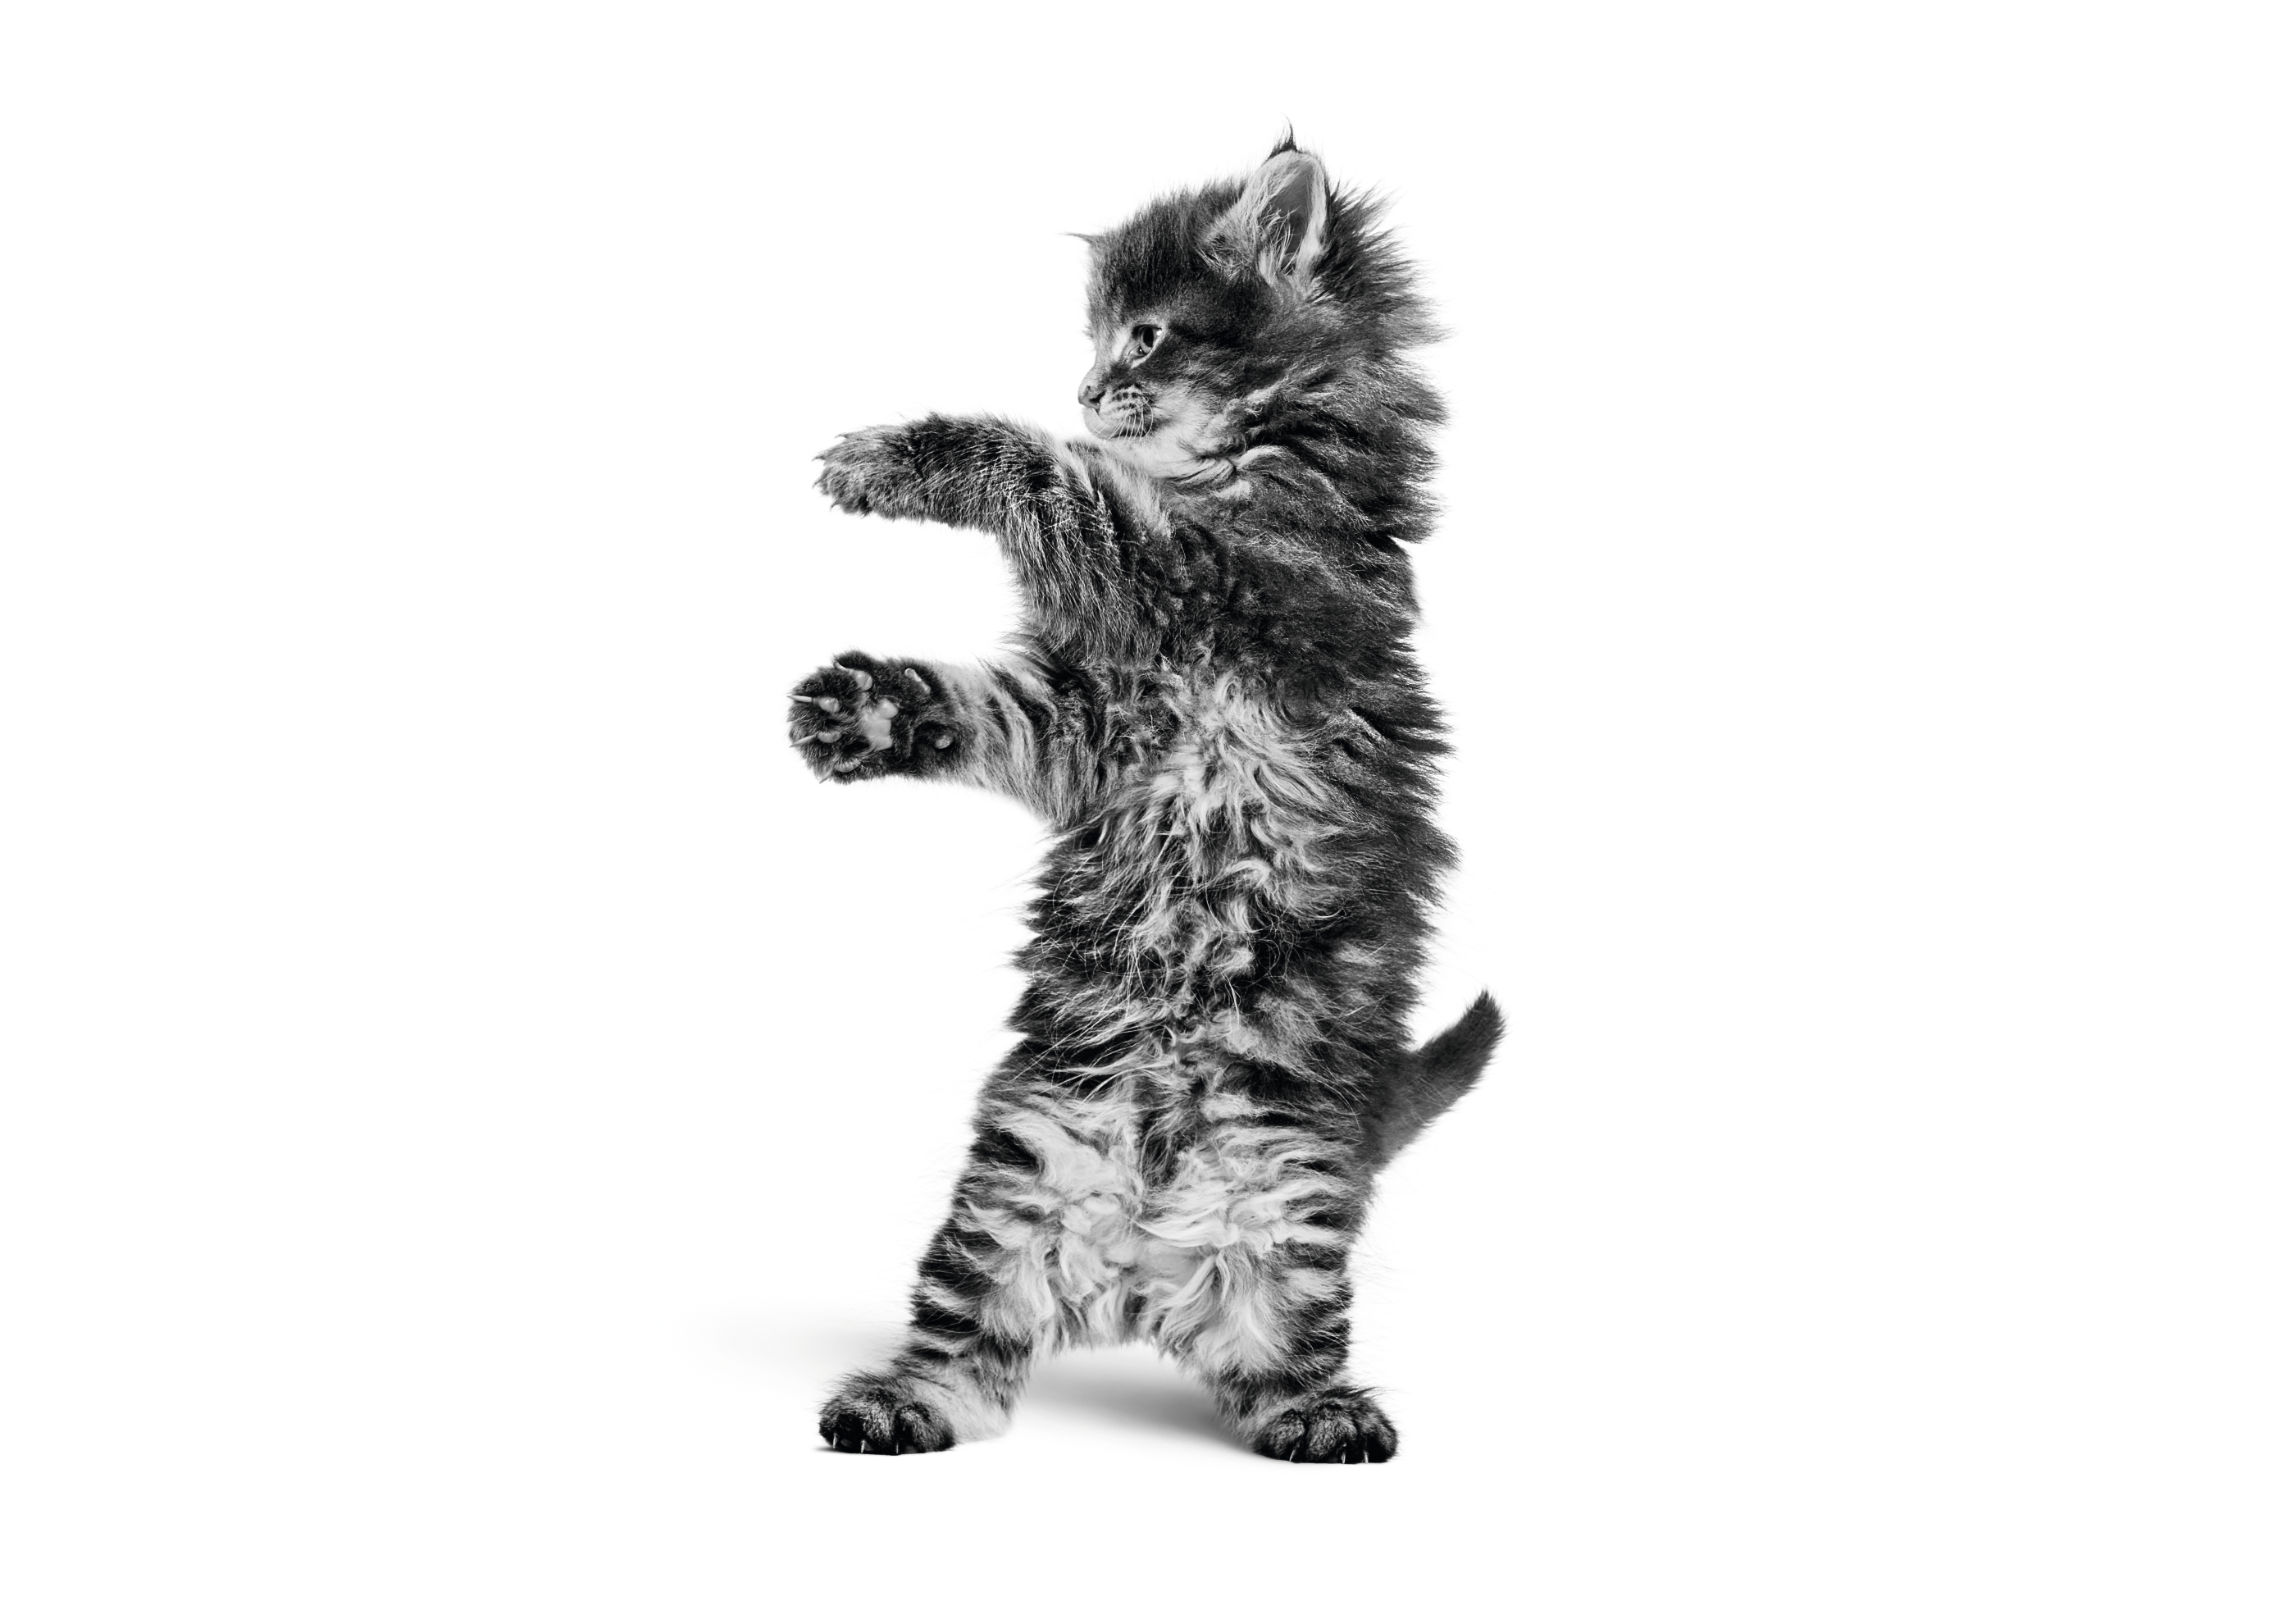 Maine coon kitten standing in black and white on a white background